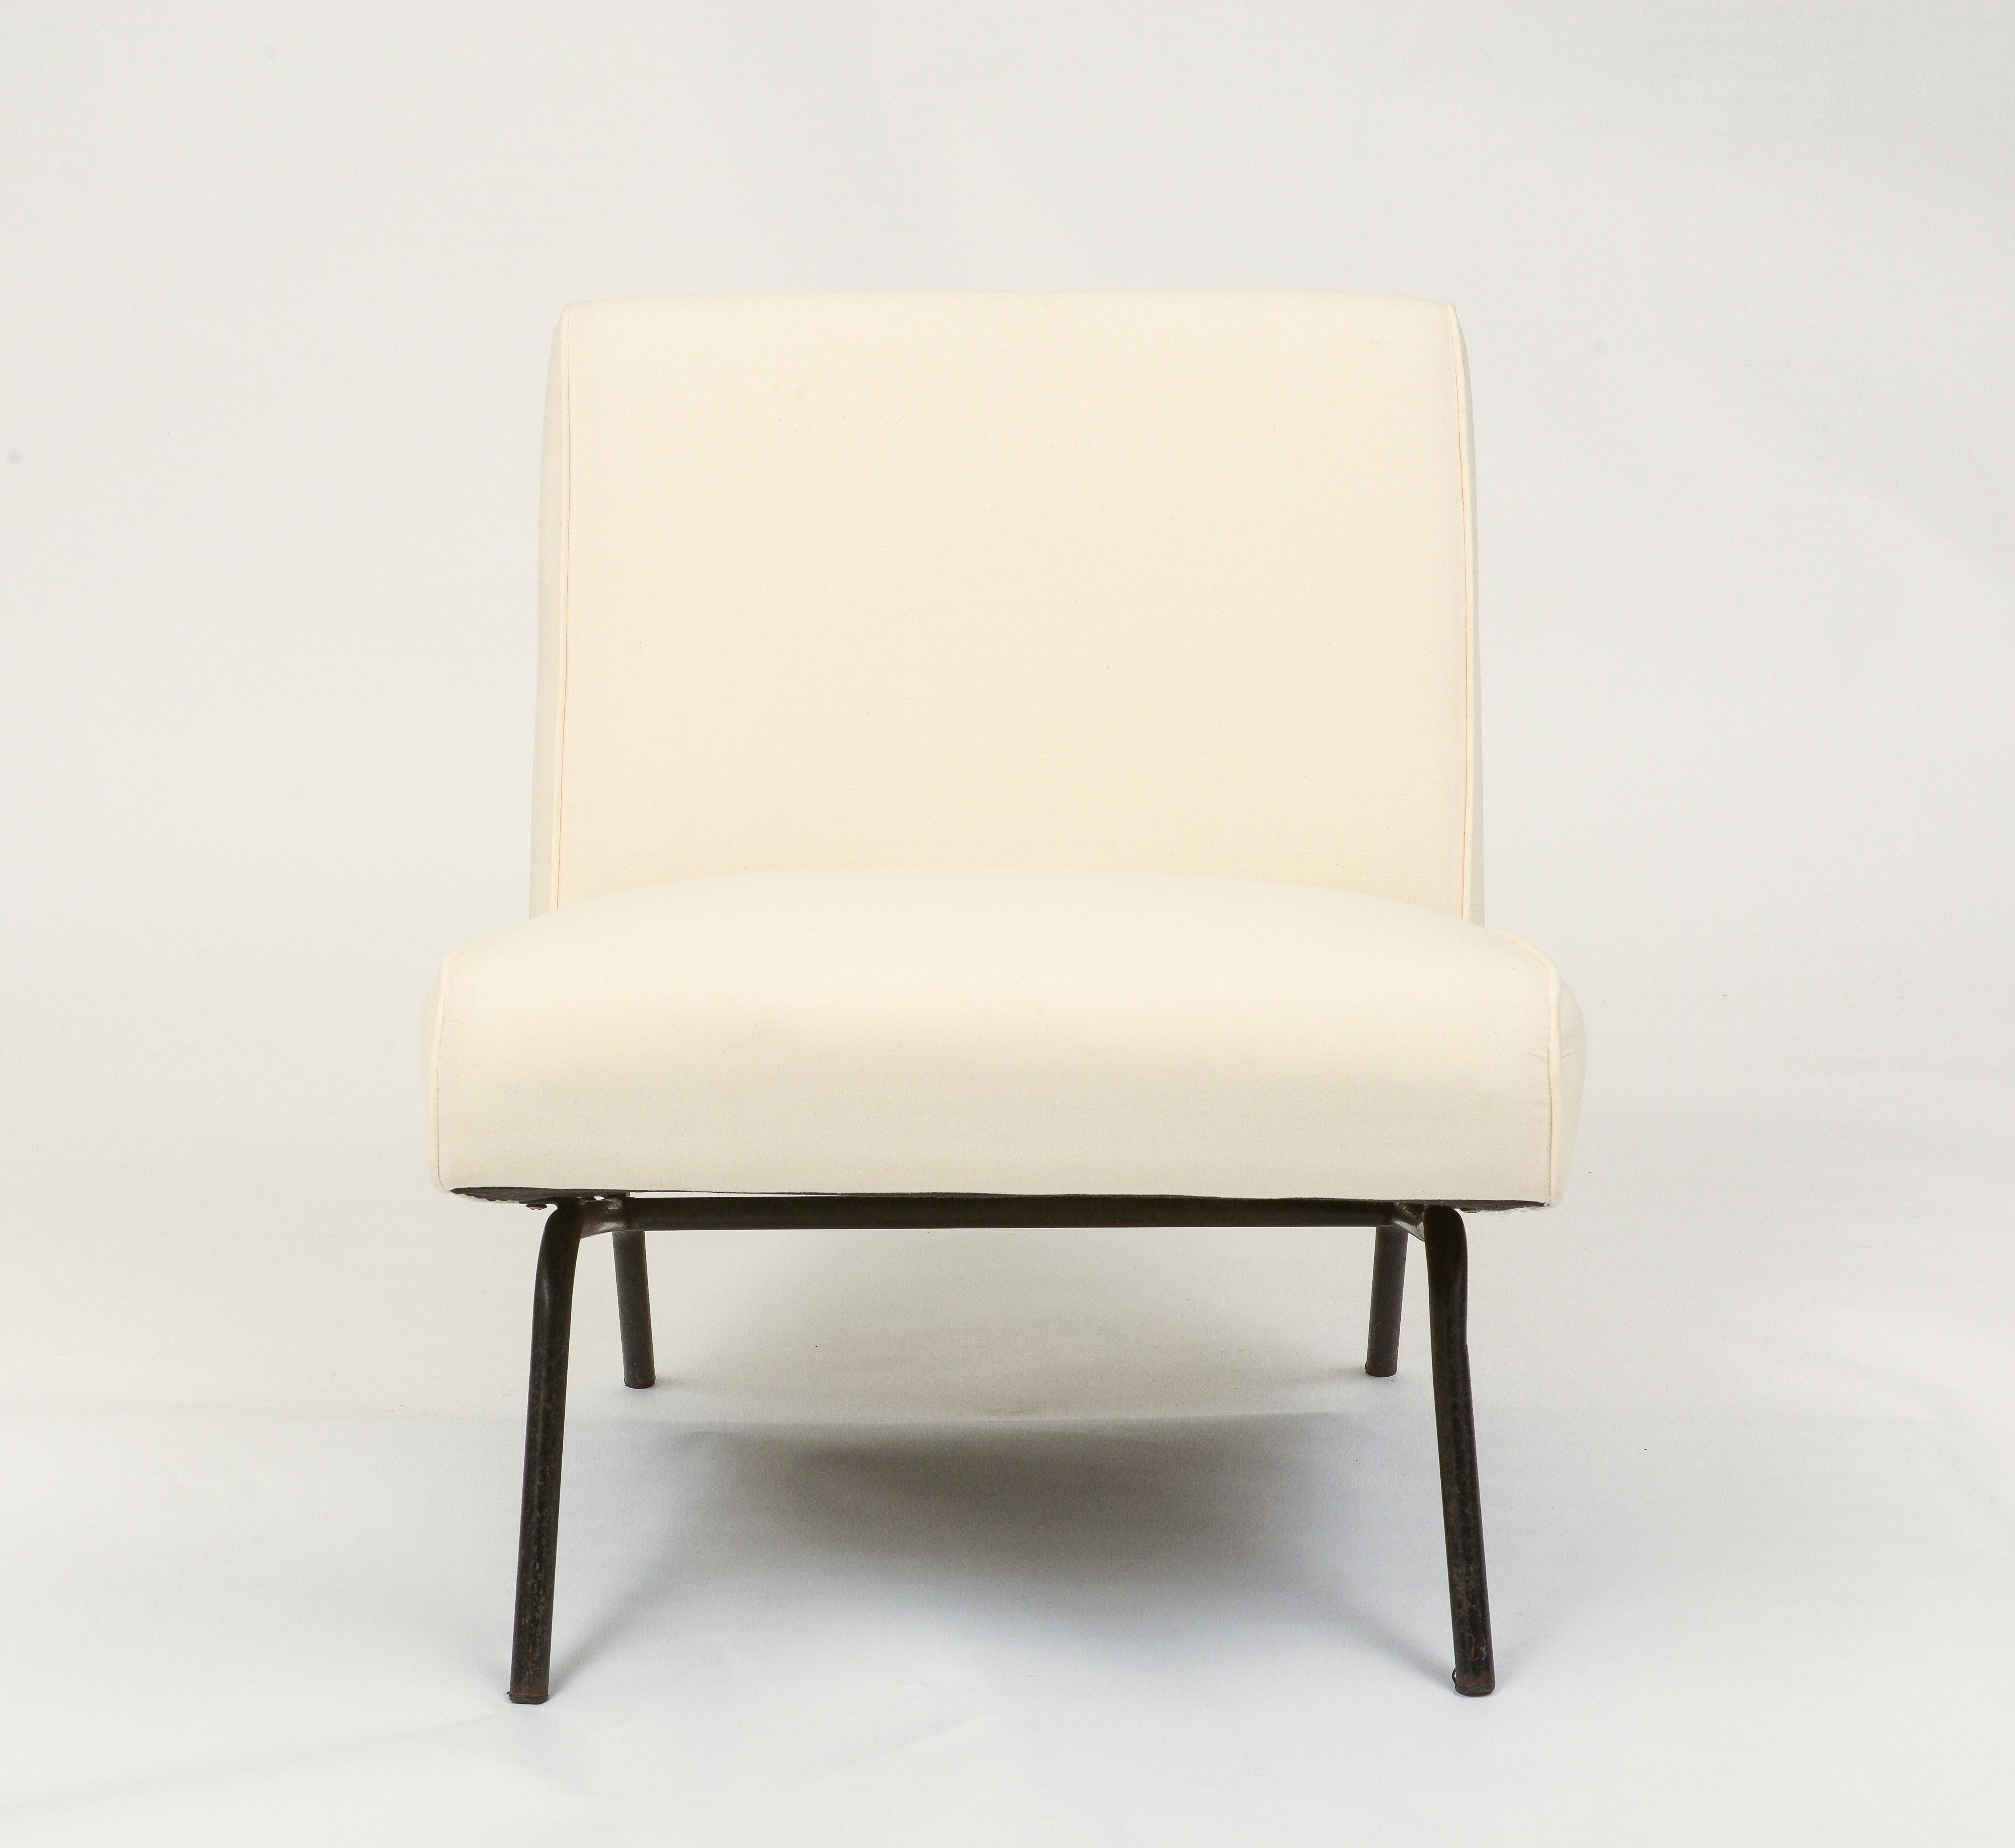 20th Century Joseph Andre Motte Single White Chair with Iron Legs, France 1960